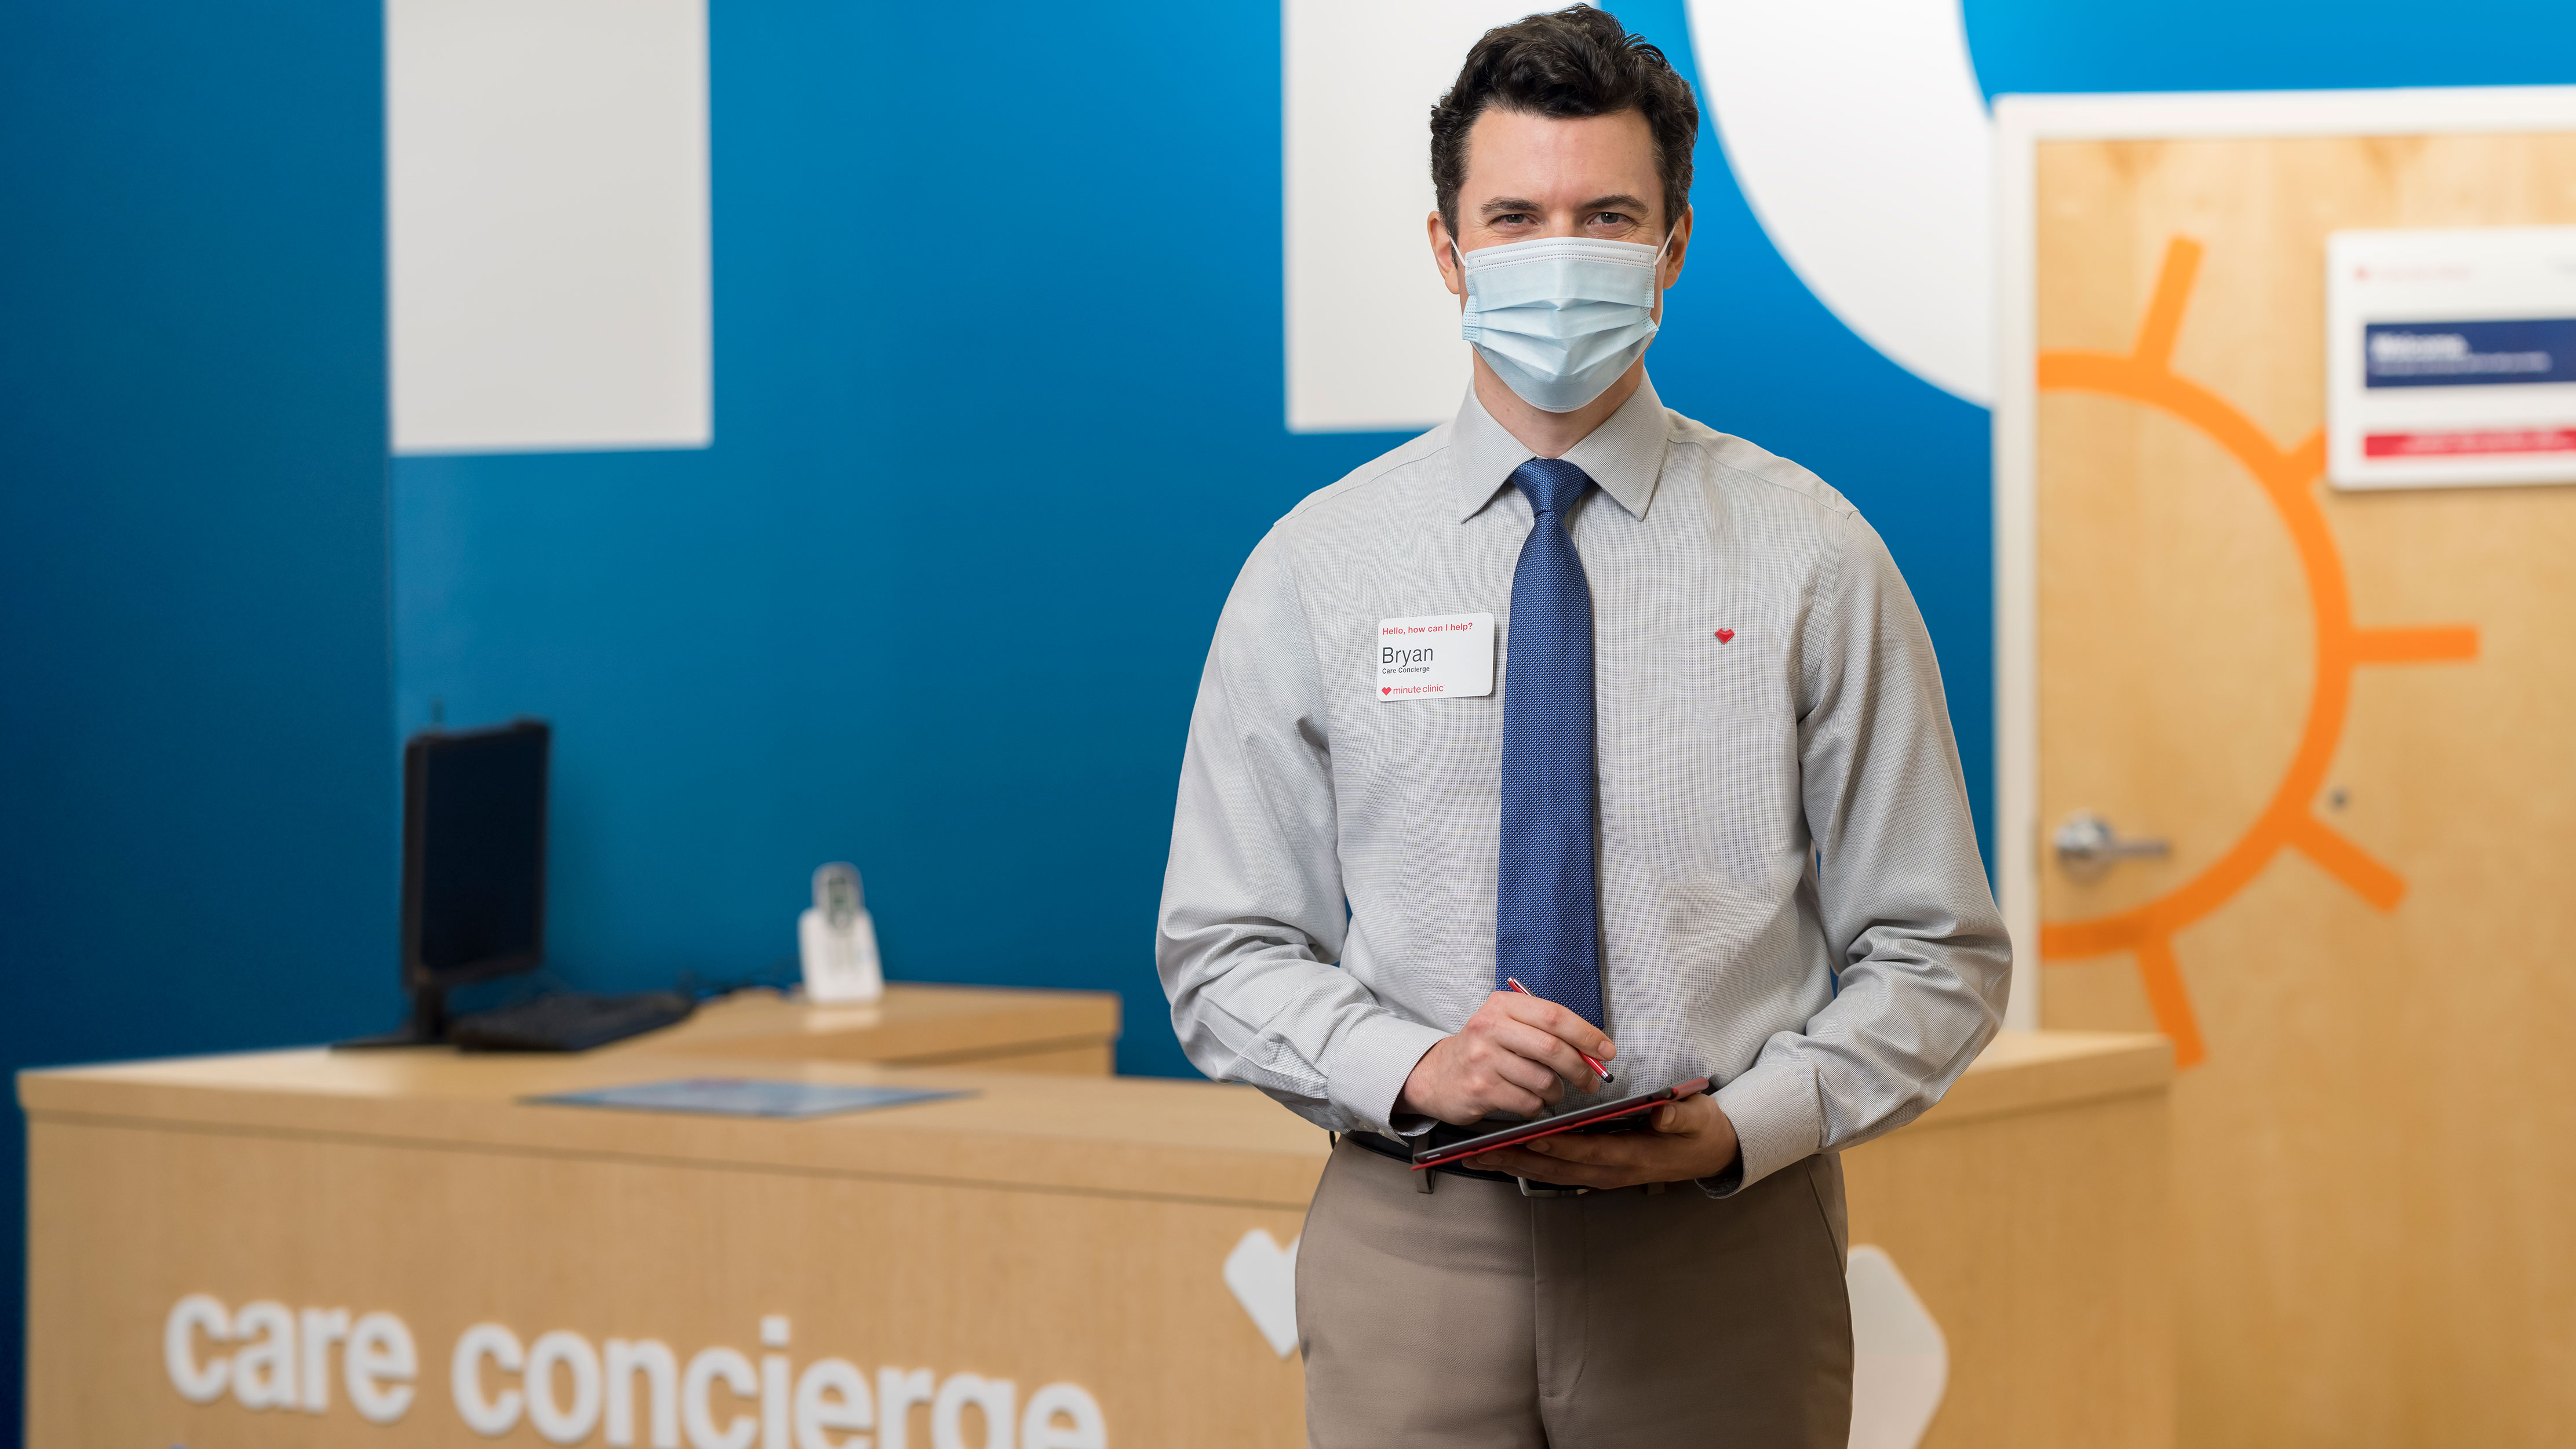 A masked Care concierge stands ready to greet guests at the check-in station for a HealthHUB inside a CVS MinuteClinic